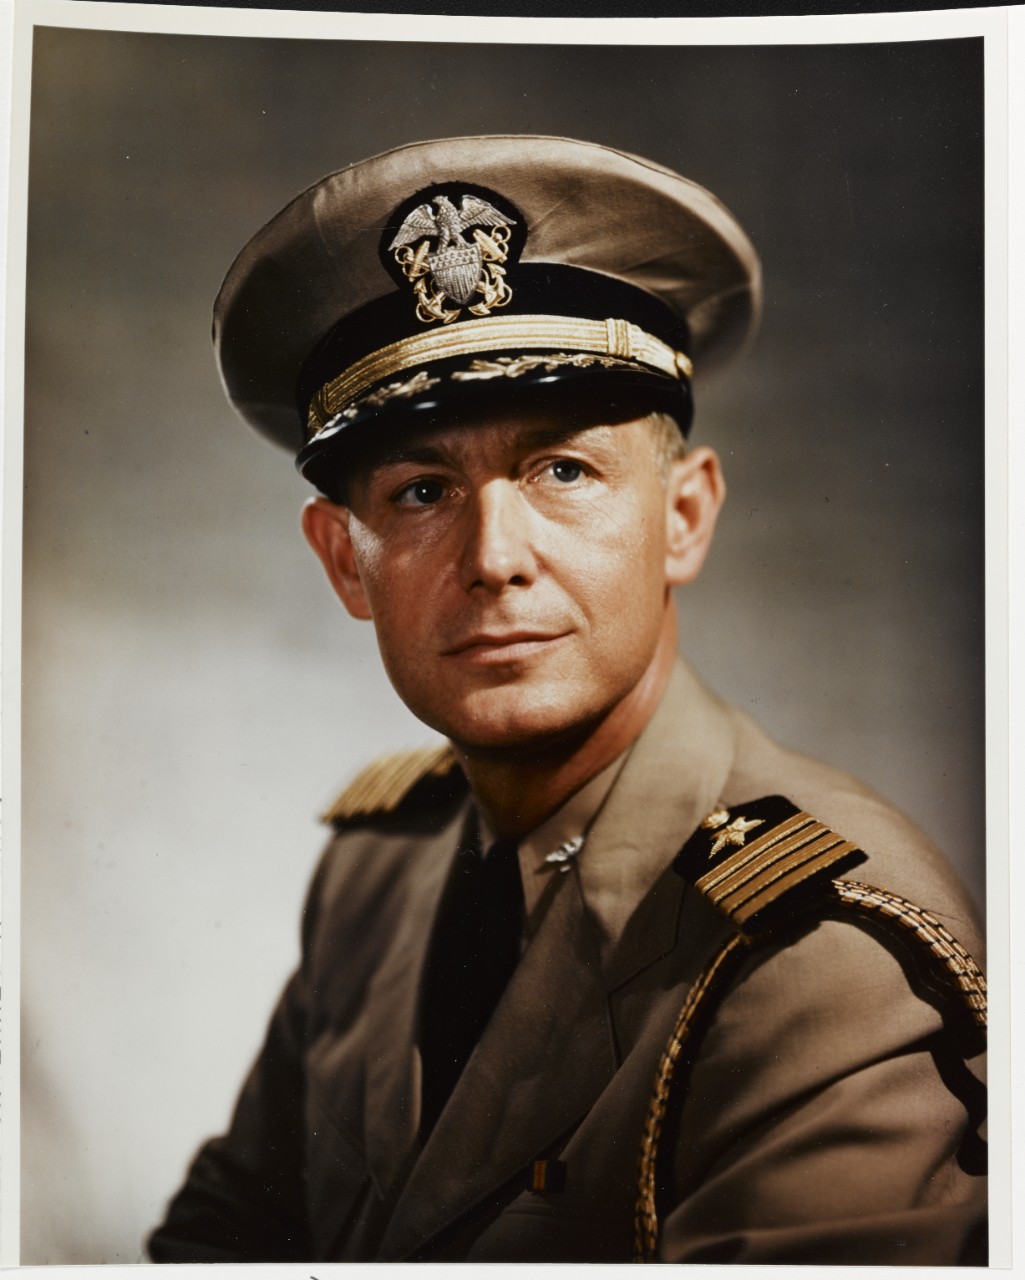 Captain George Piper, Aide to Under Secretary of the Navy Ralph A. Bard, July 1945